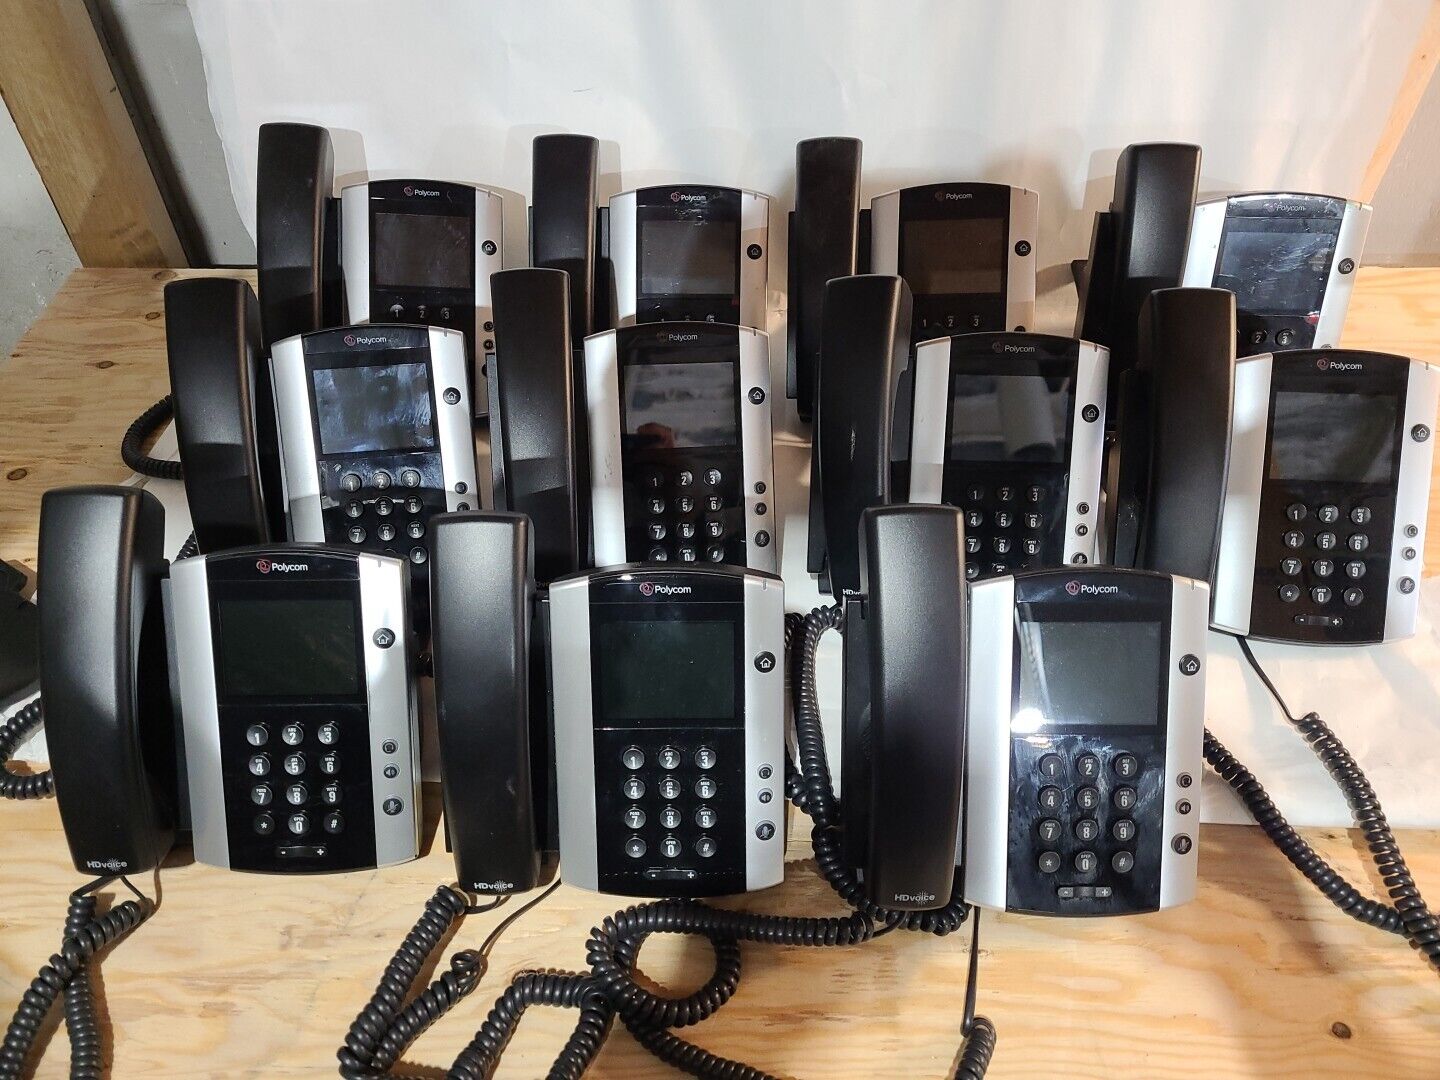 Lot of 11 Polycom VVX 500 IP Gigabit VOIP Phone with Color Touch Screen